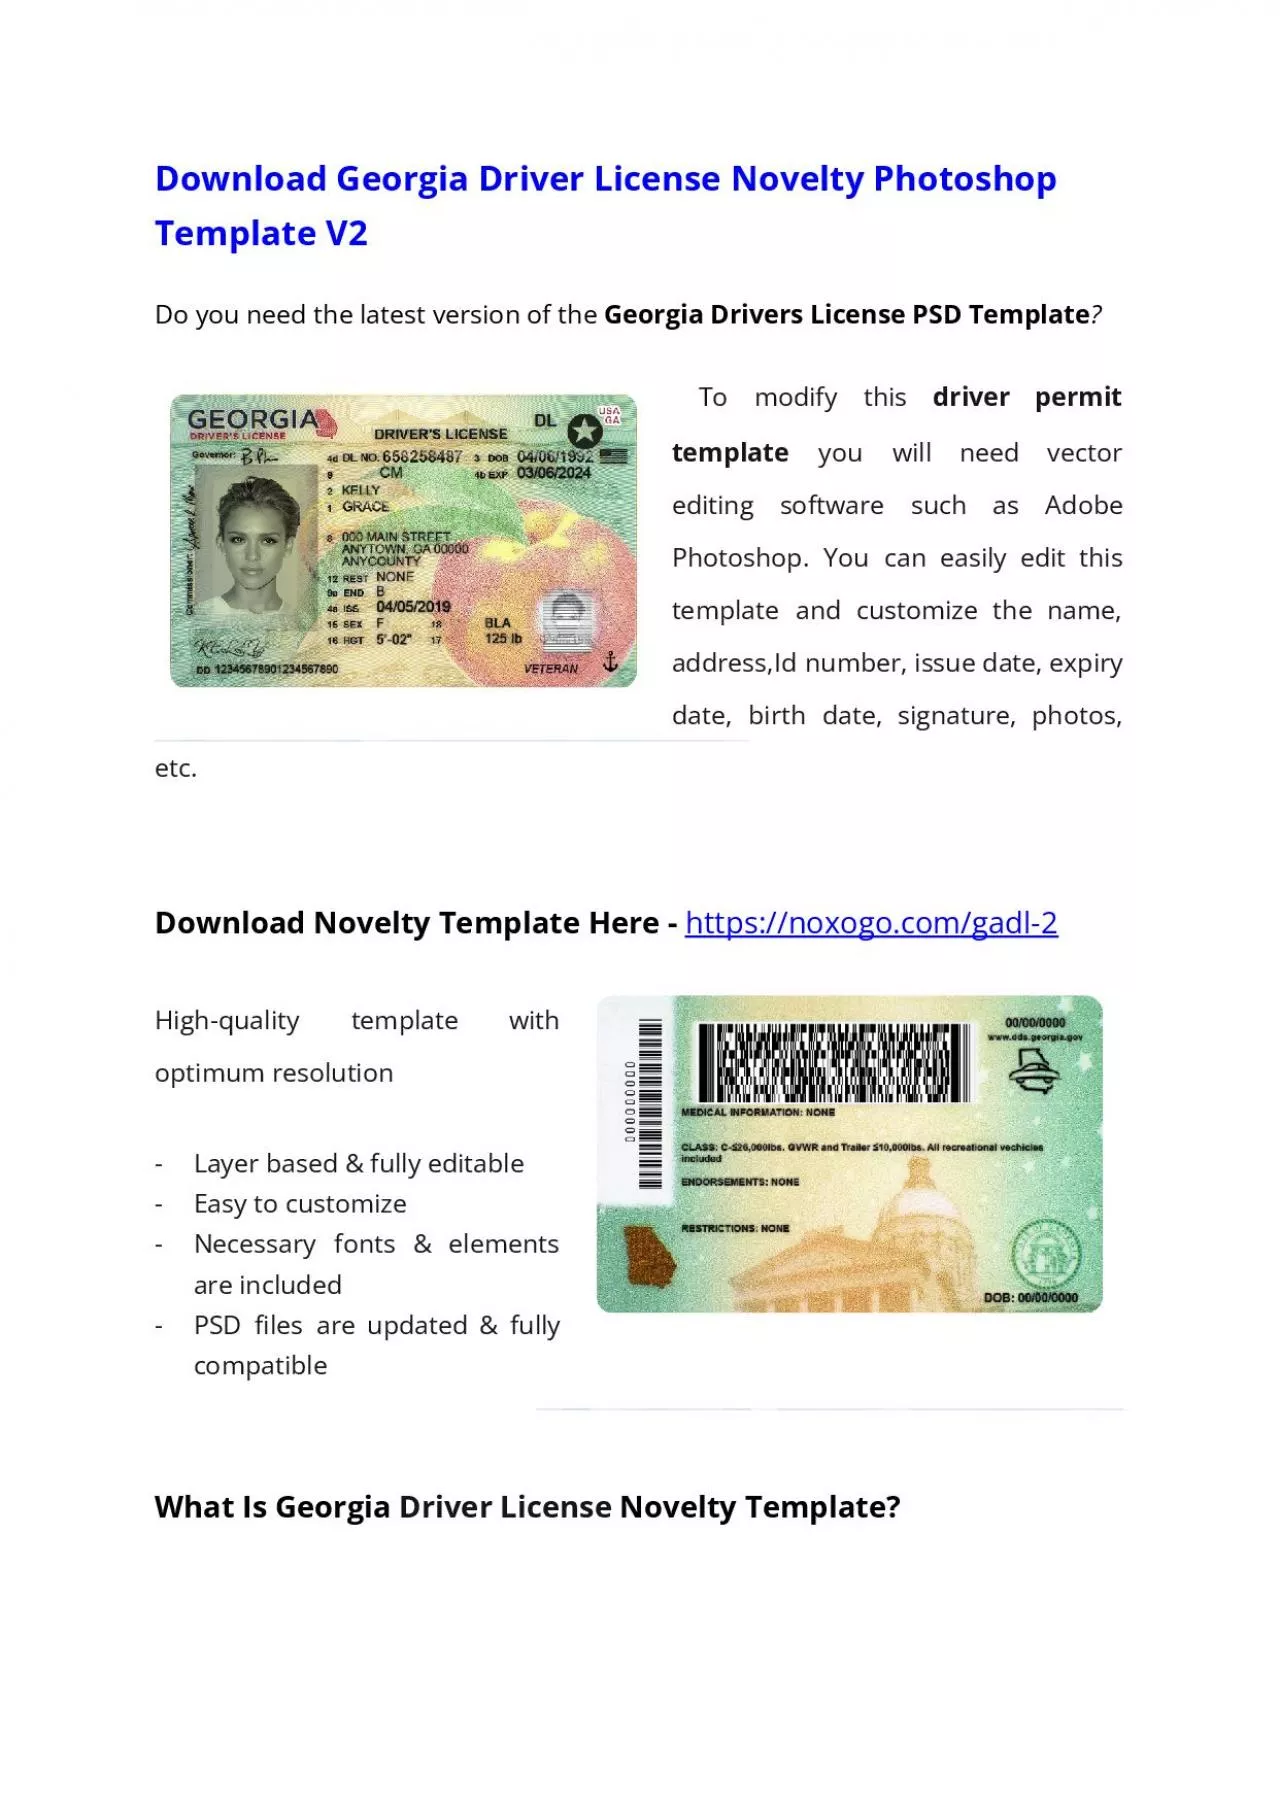 Georgia Drivers License PSD Template (V2) – Download Photoshop File